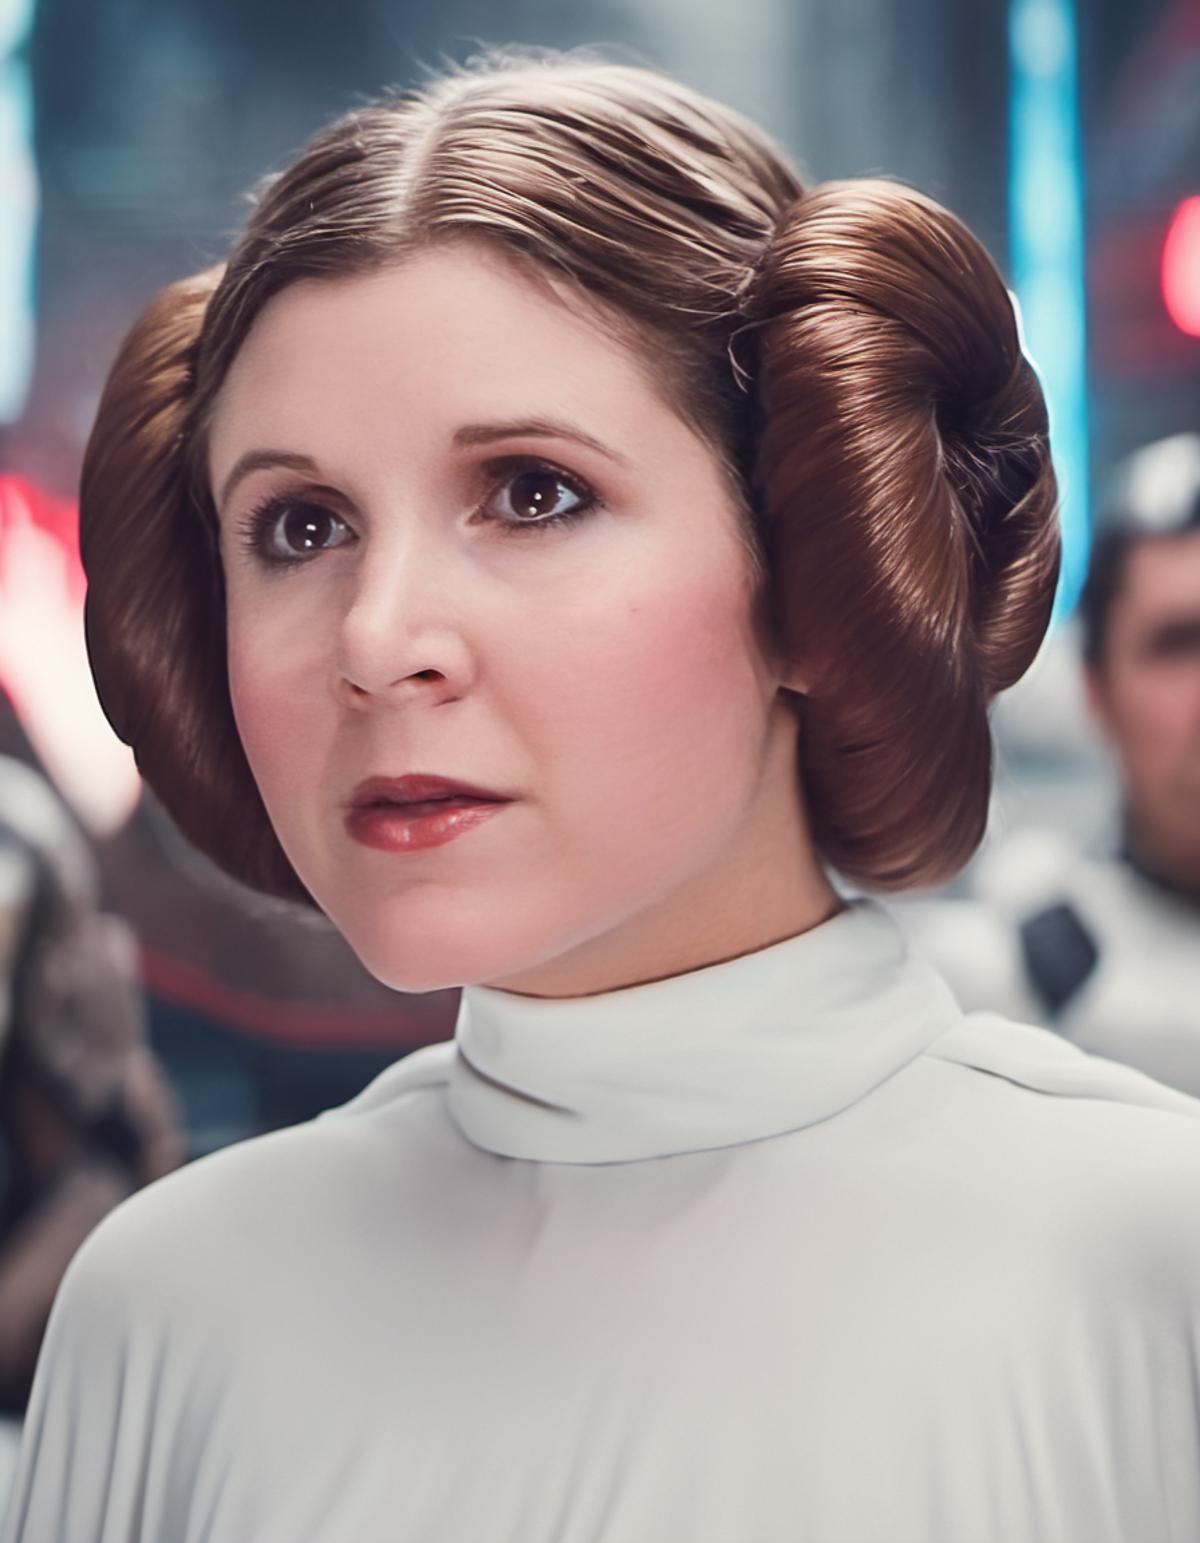 Princess Leia from Star Wars (LoRA SDXL 1.0) image by astragartist